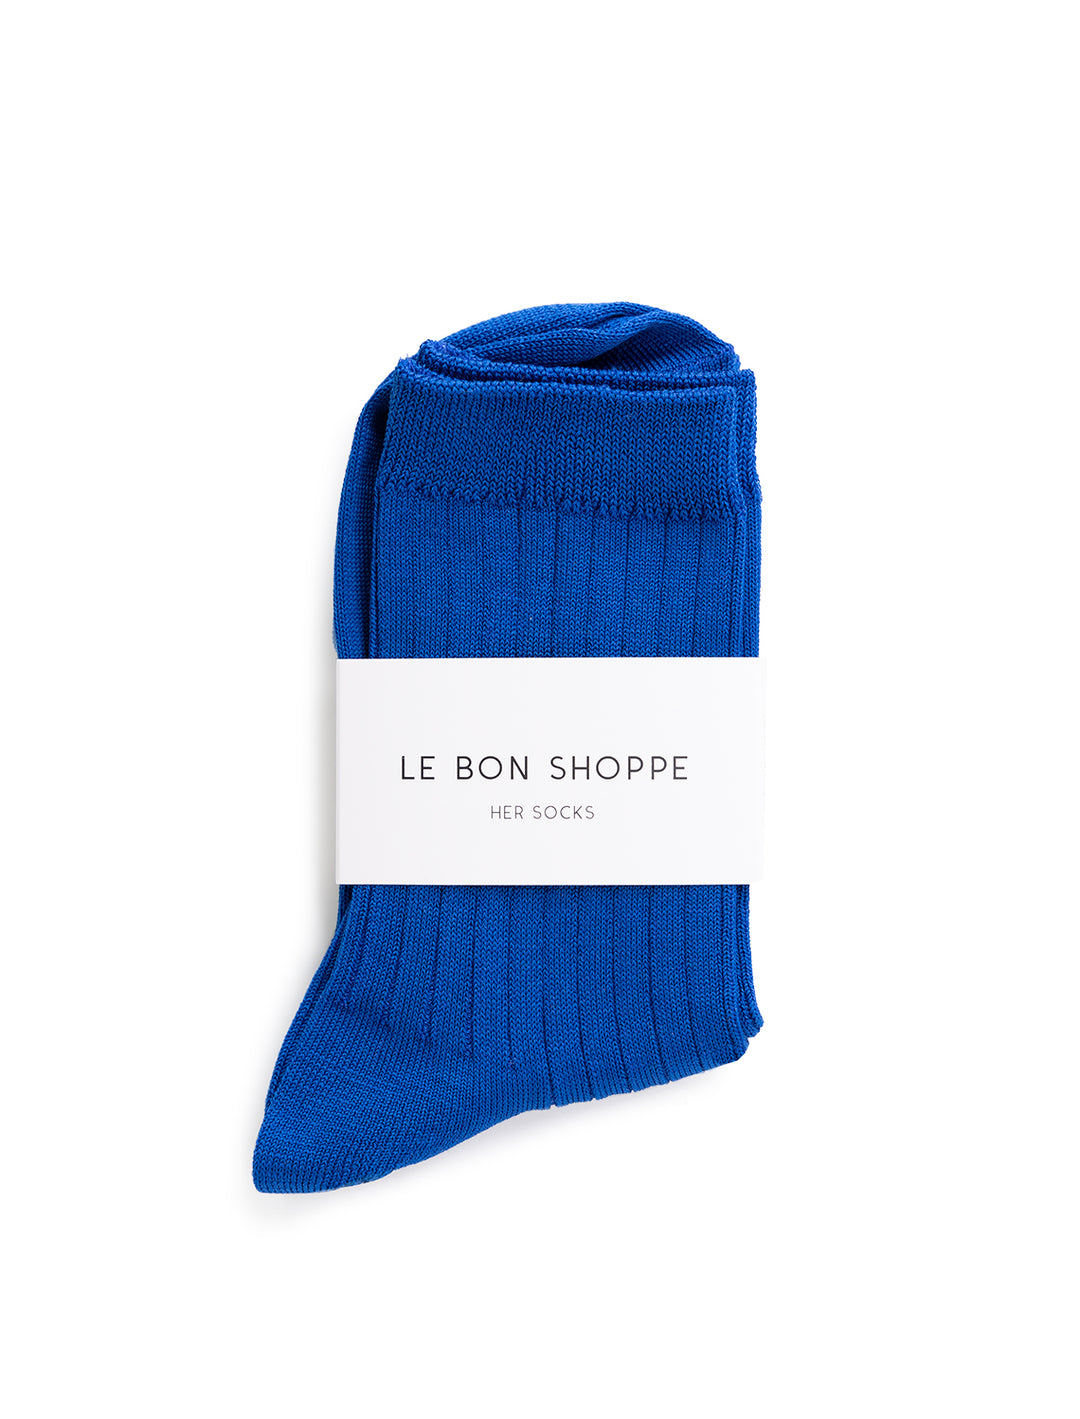 Front view of Le Bon Shoppe's her socks in cobalt.